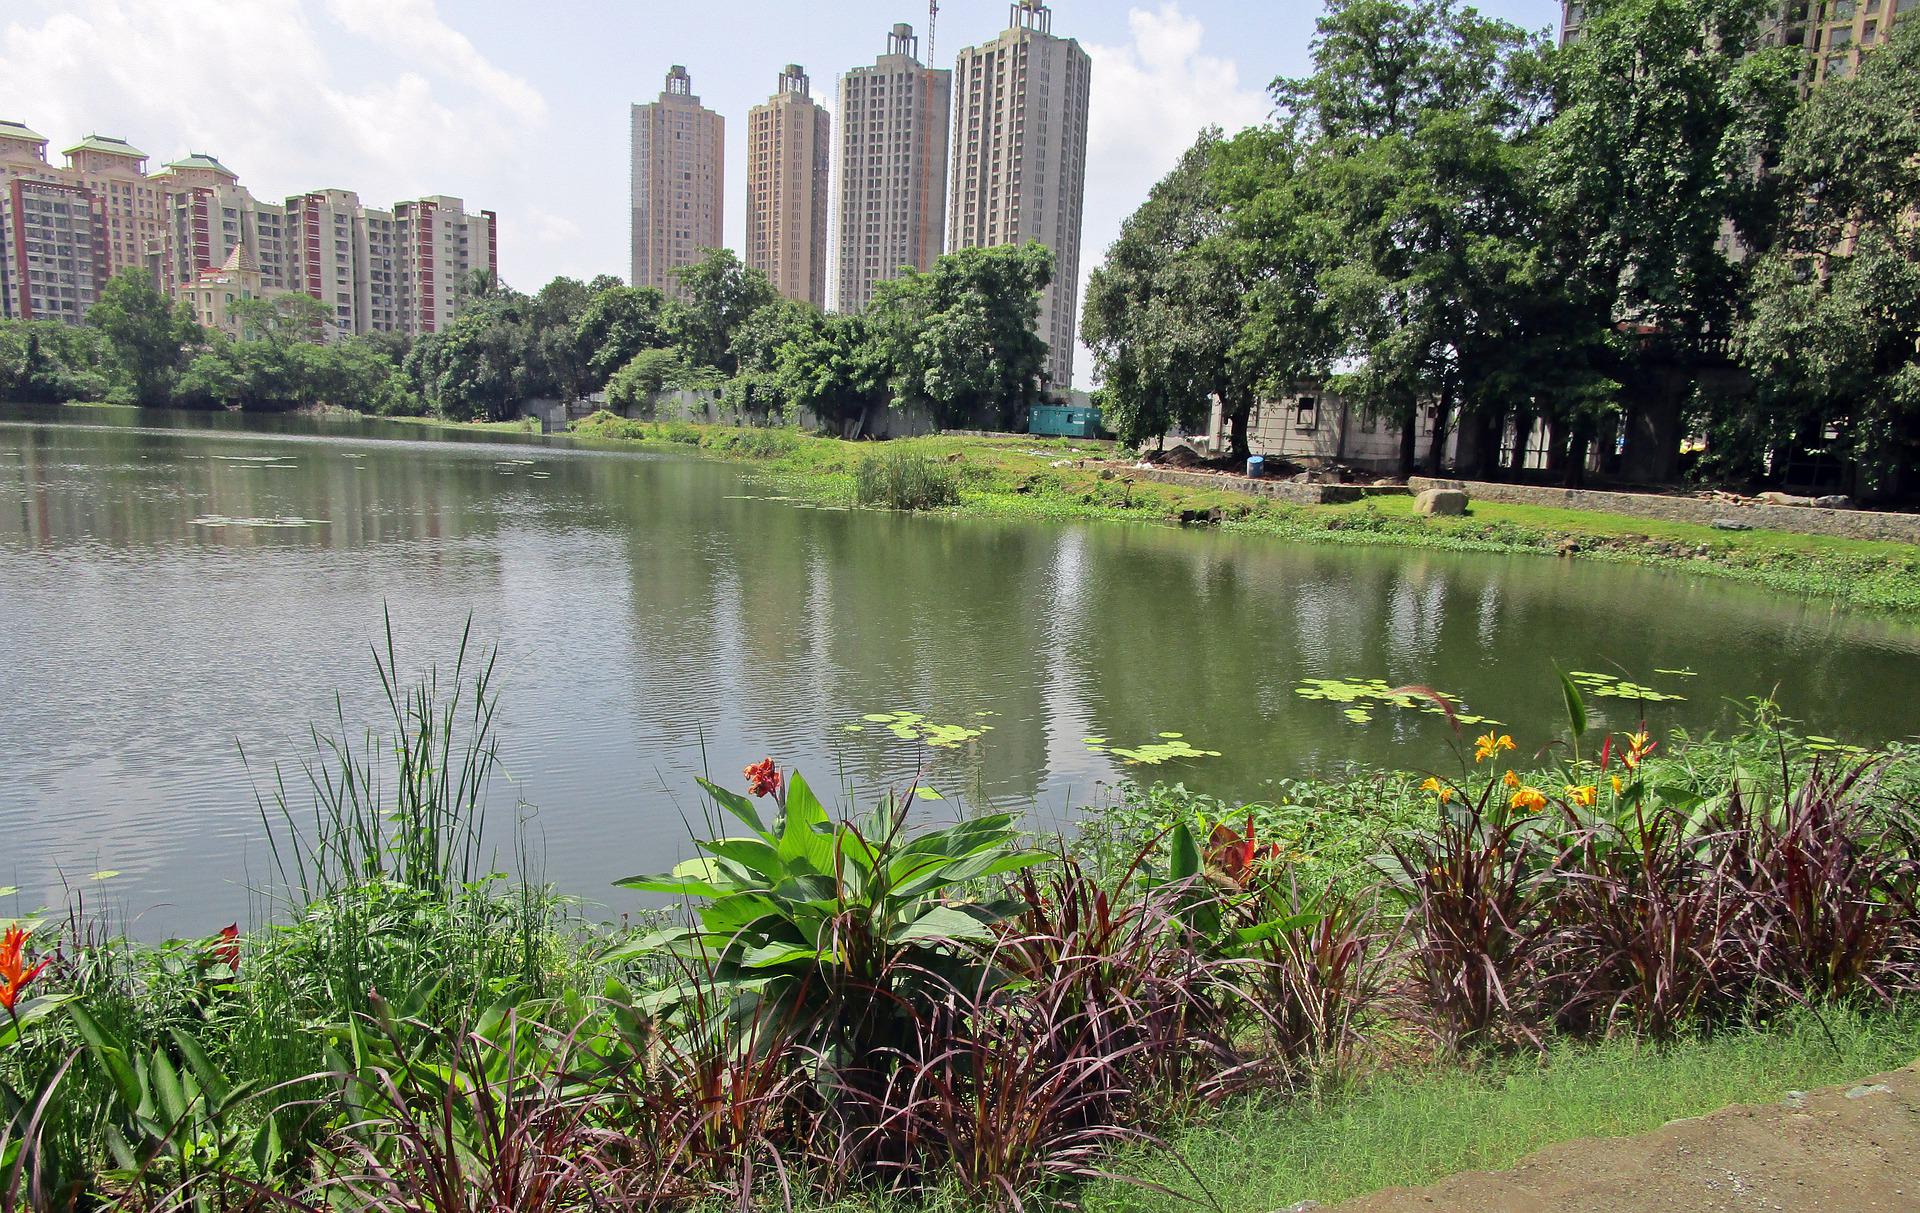 Thane: A Leading Residential Destination to Live in MMR